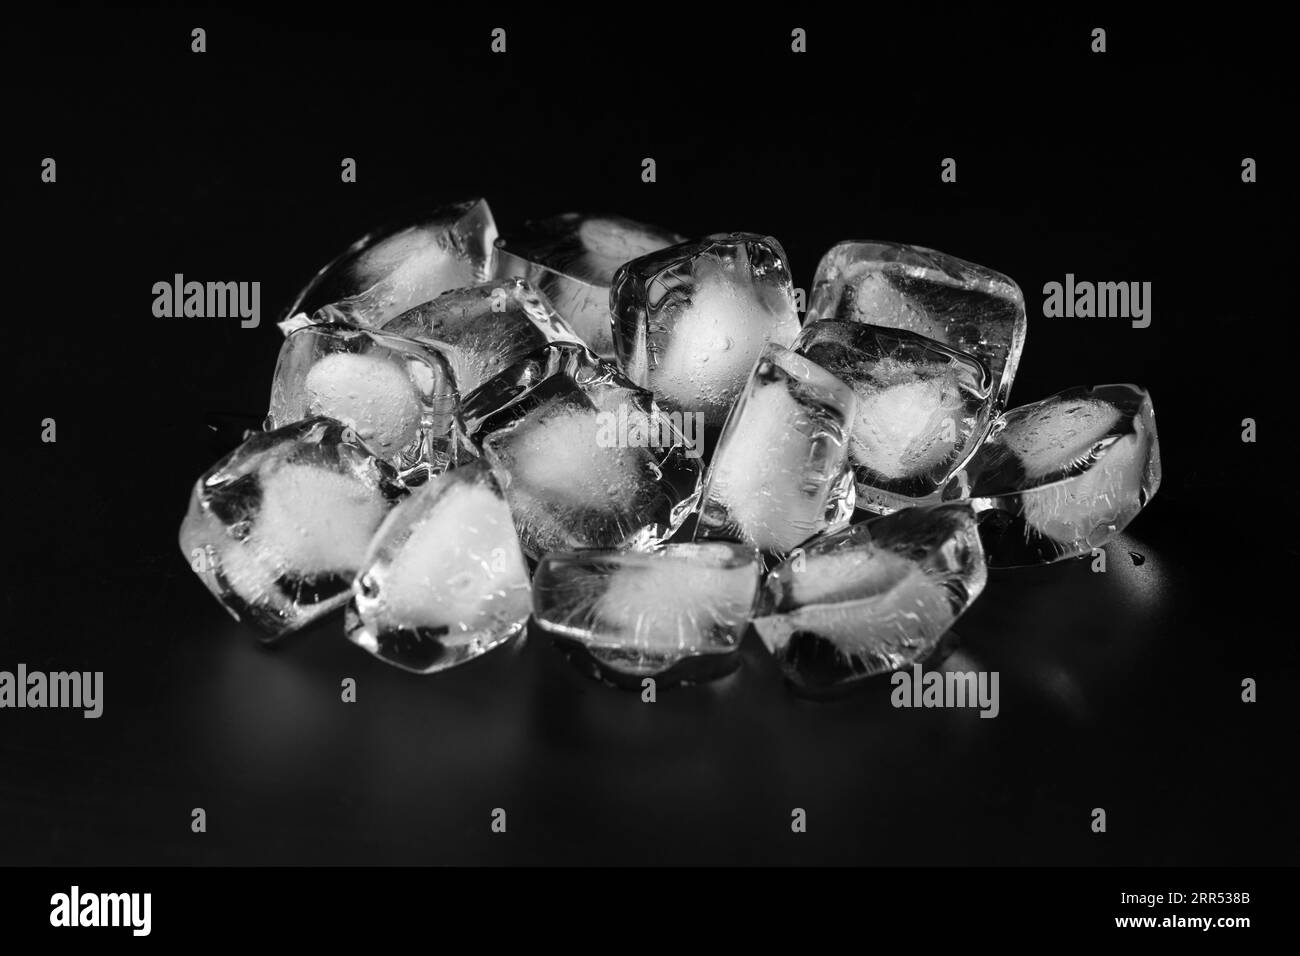 Ice cube Black and White Stock Photos & Images - Alamy